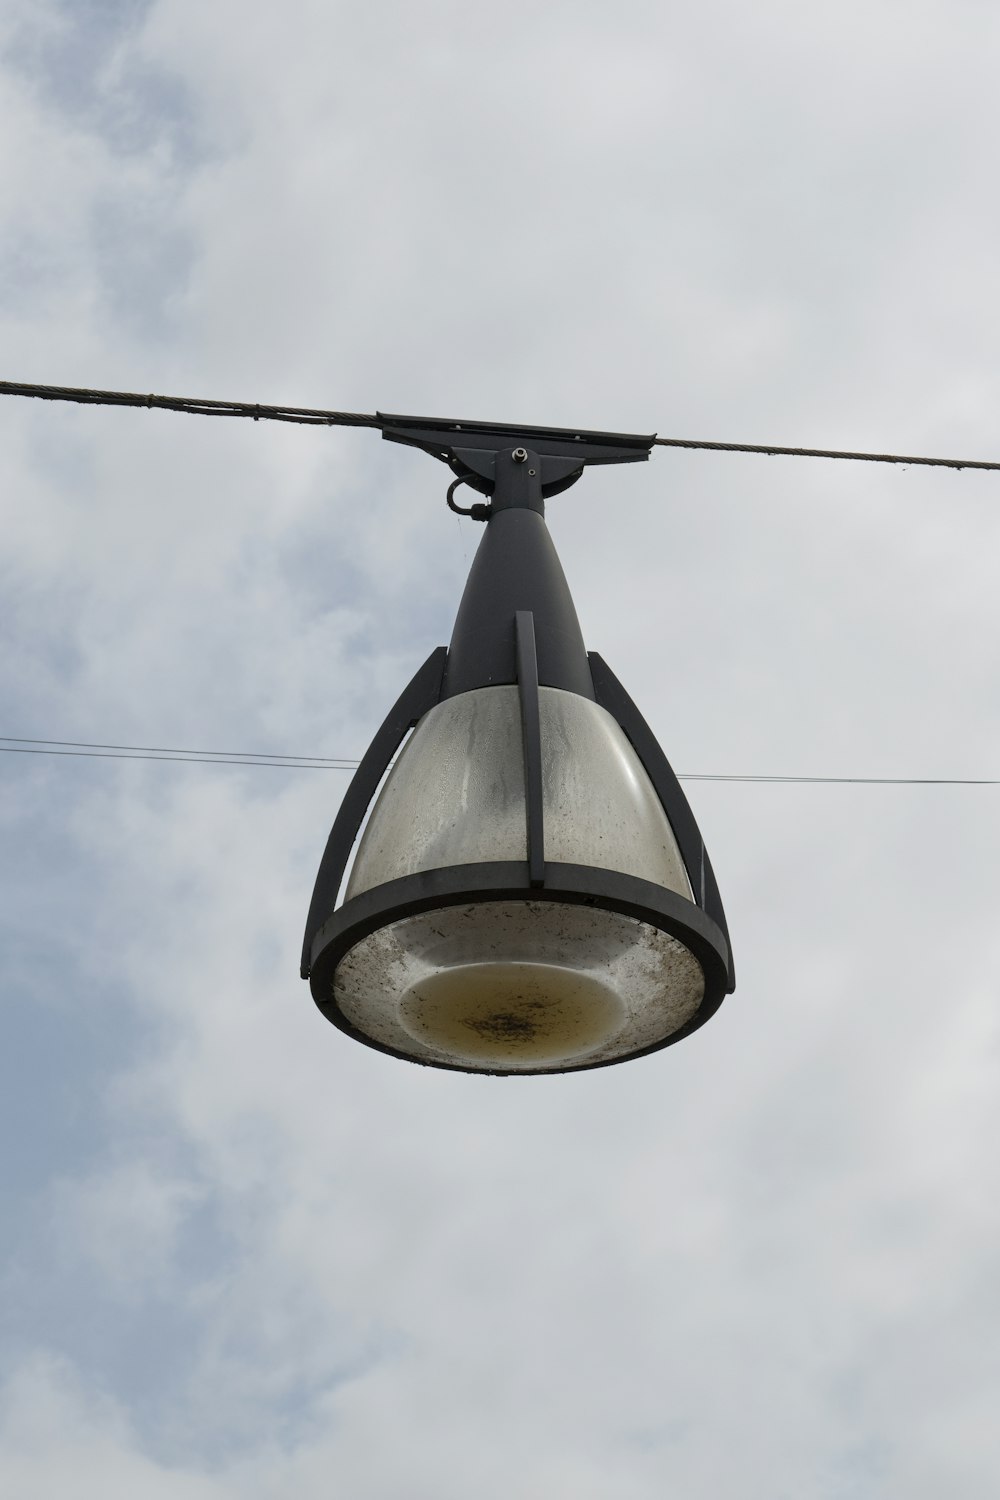 a street light hanging from a wire on a cloudy day